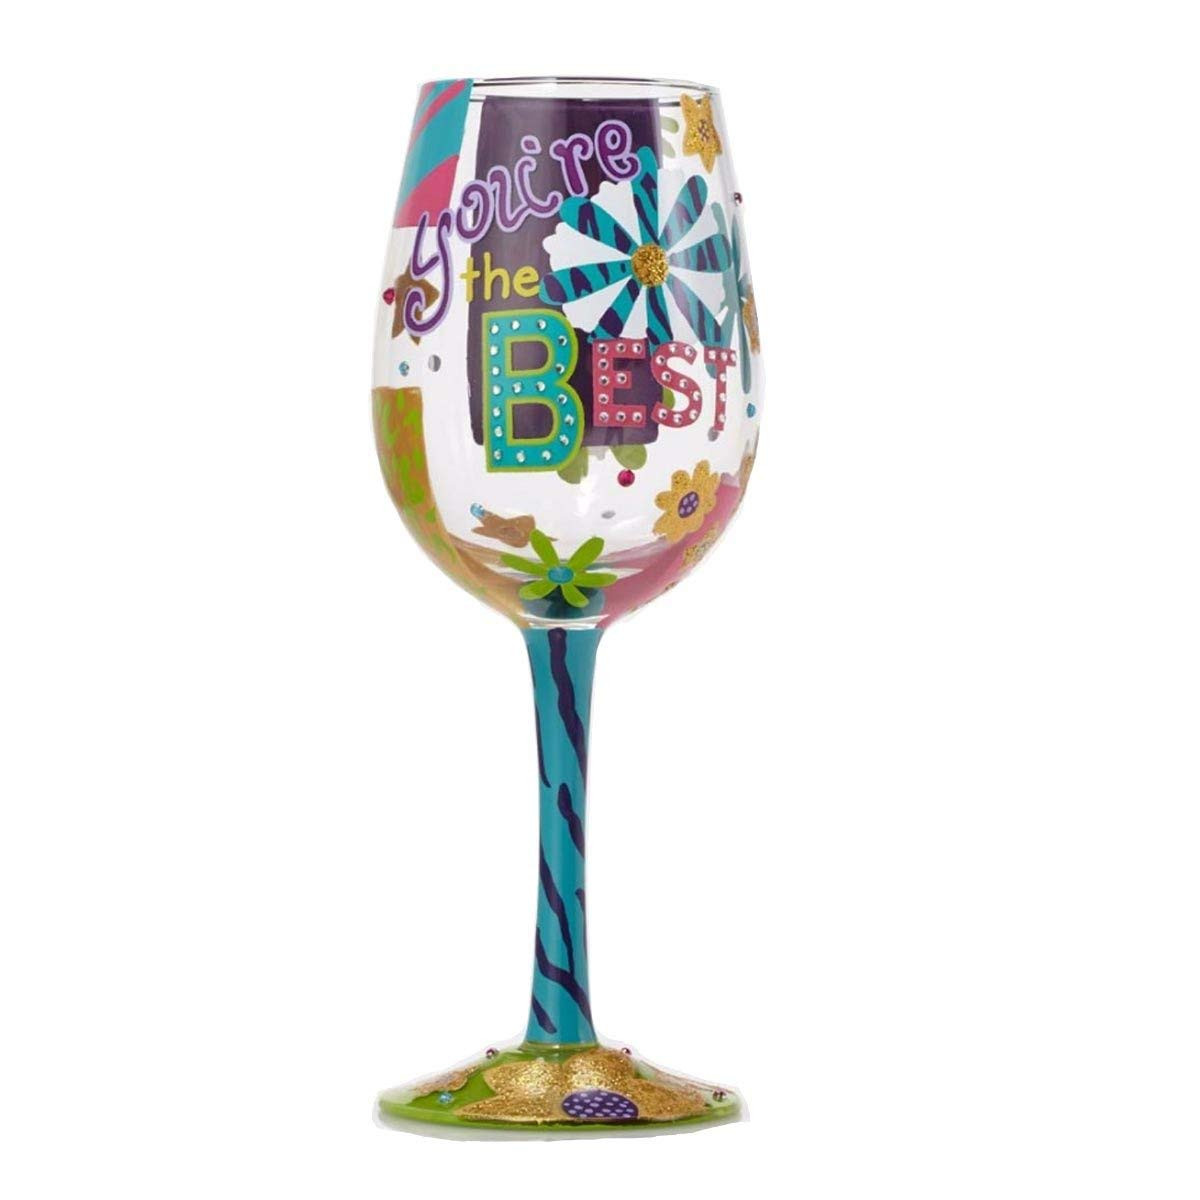 12 Popular Most Expensive Crystal Vases 2024 free download most expensive crystal vases of amazon com lolita happy retirement artisan painted wine glass gift with amazon com lolita happy retirement artisan painted wine glass gift wine glasses